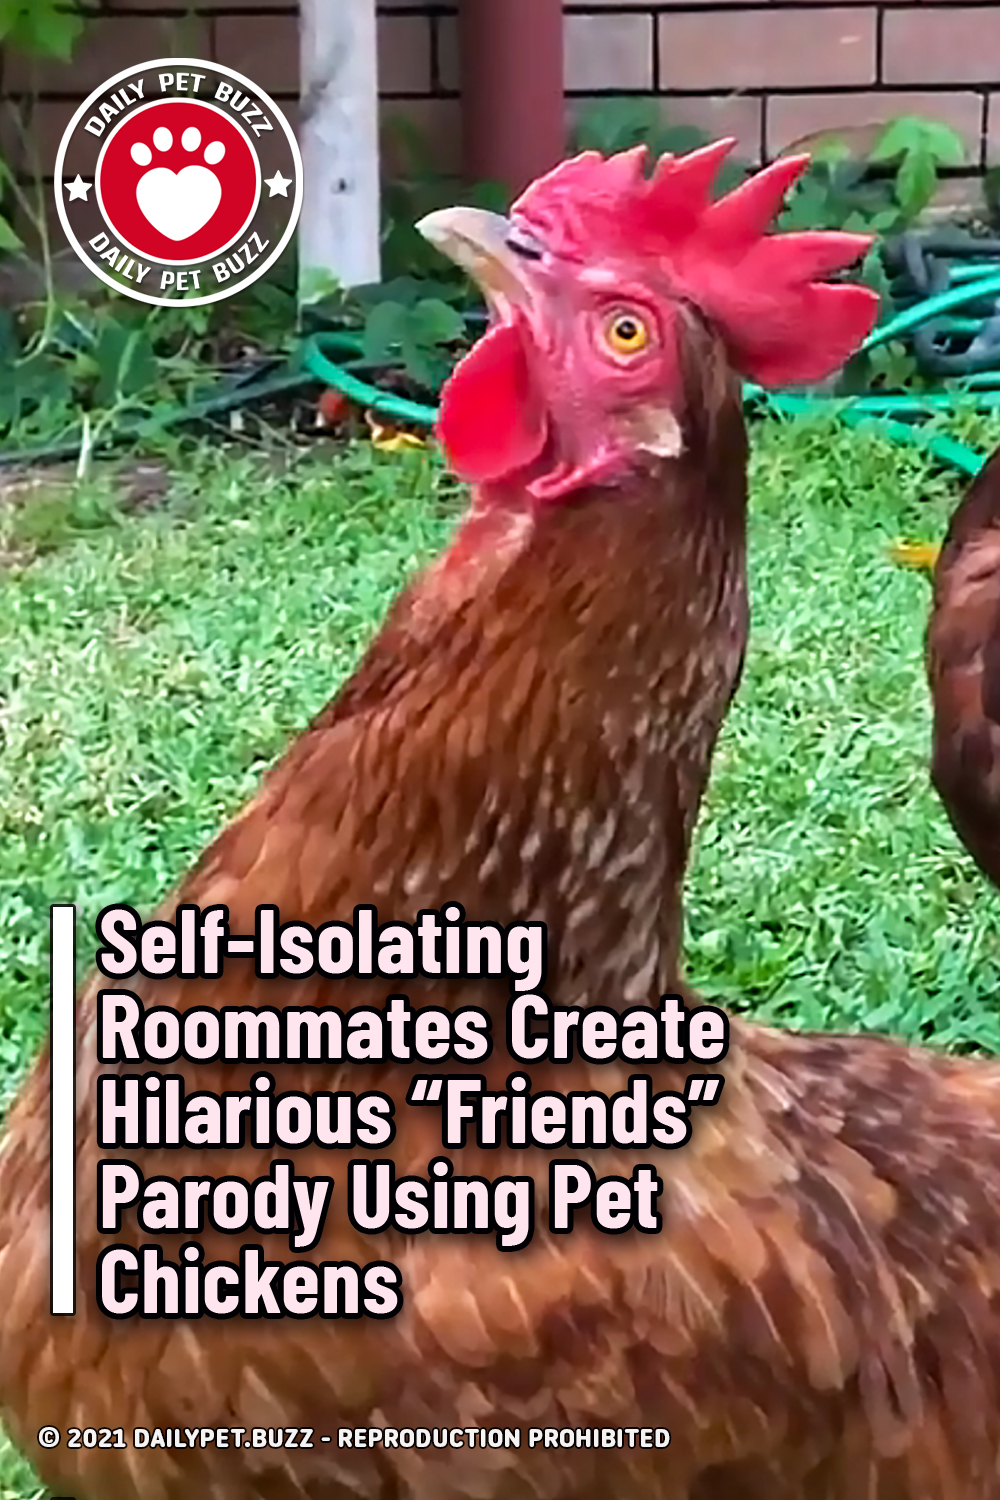 Self-Isolating Roommates Create Hilarious “Friends” Parody Using Pet Chickens